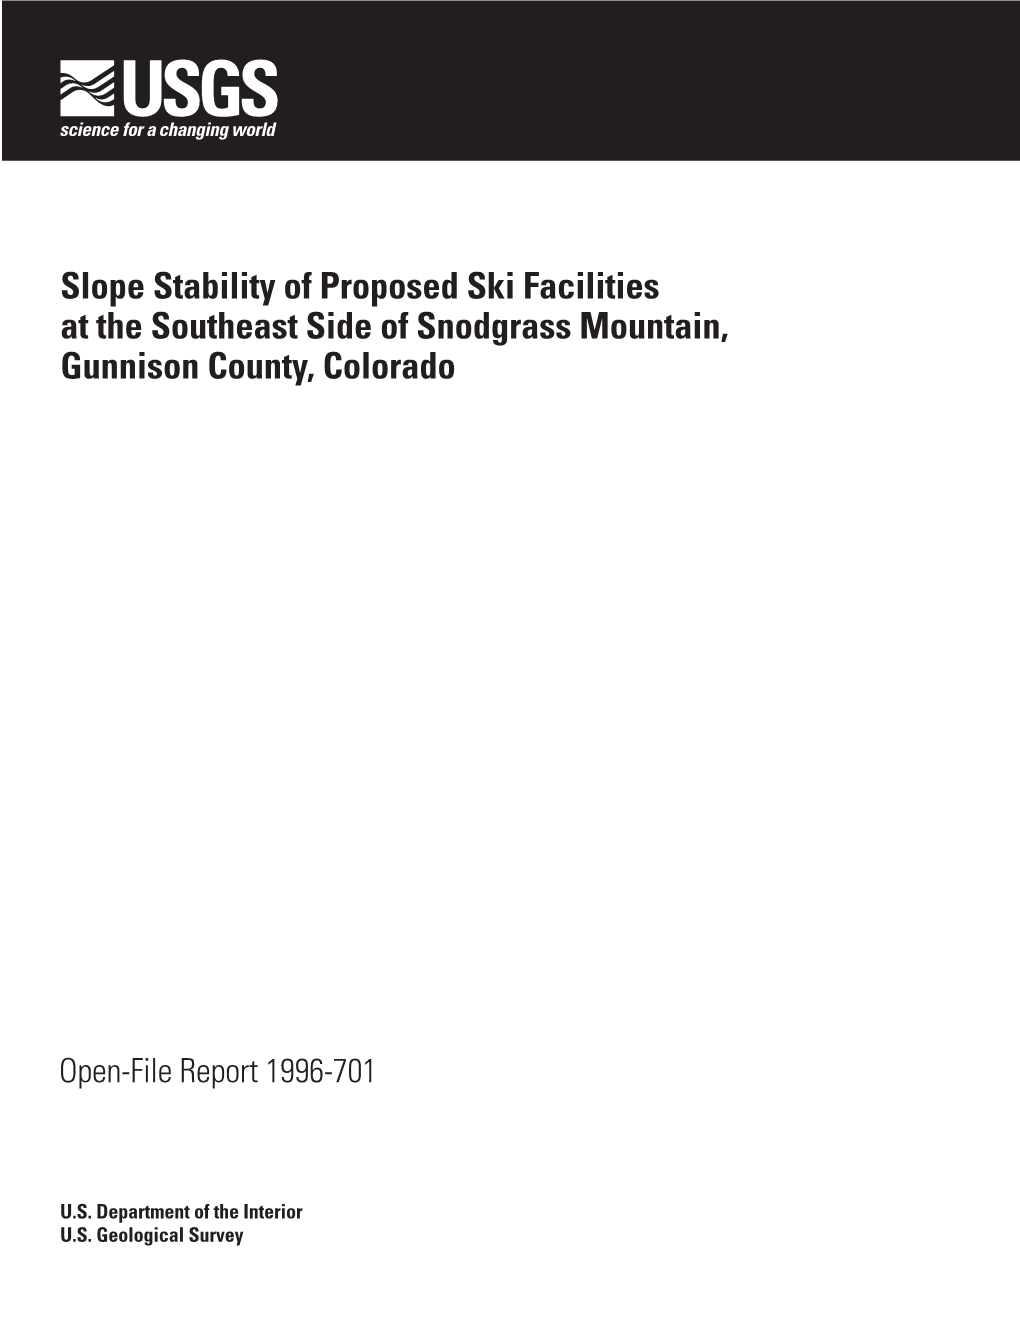 Slope Stability of Proposed Ski Facilities at the Southeast Side of Snodgrass Mountain, Gunnison County, Colorado